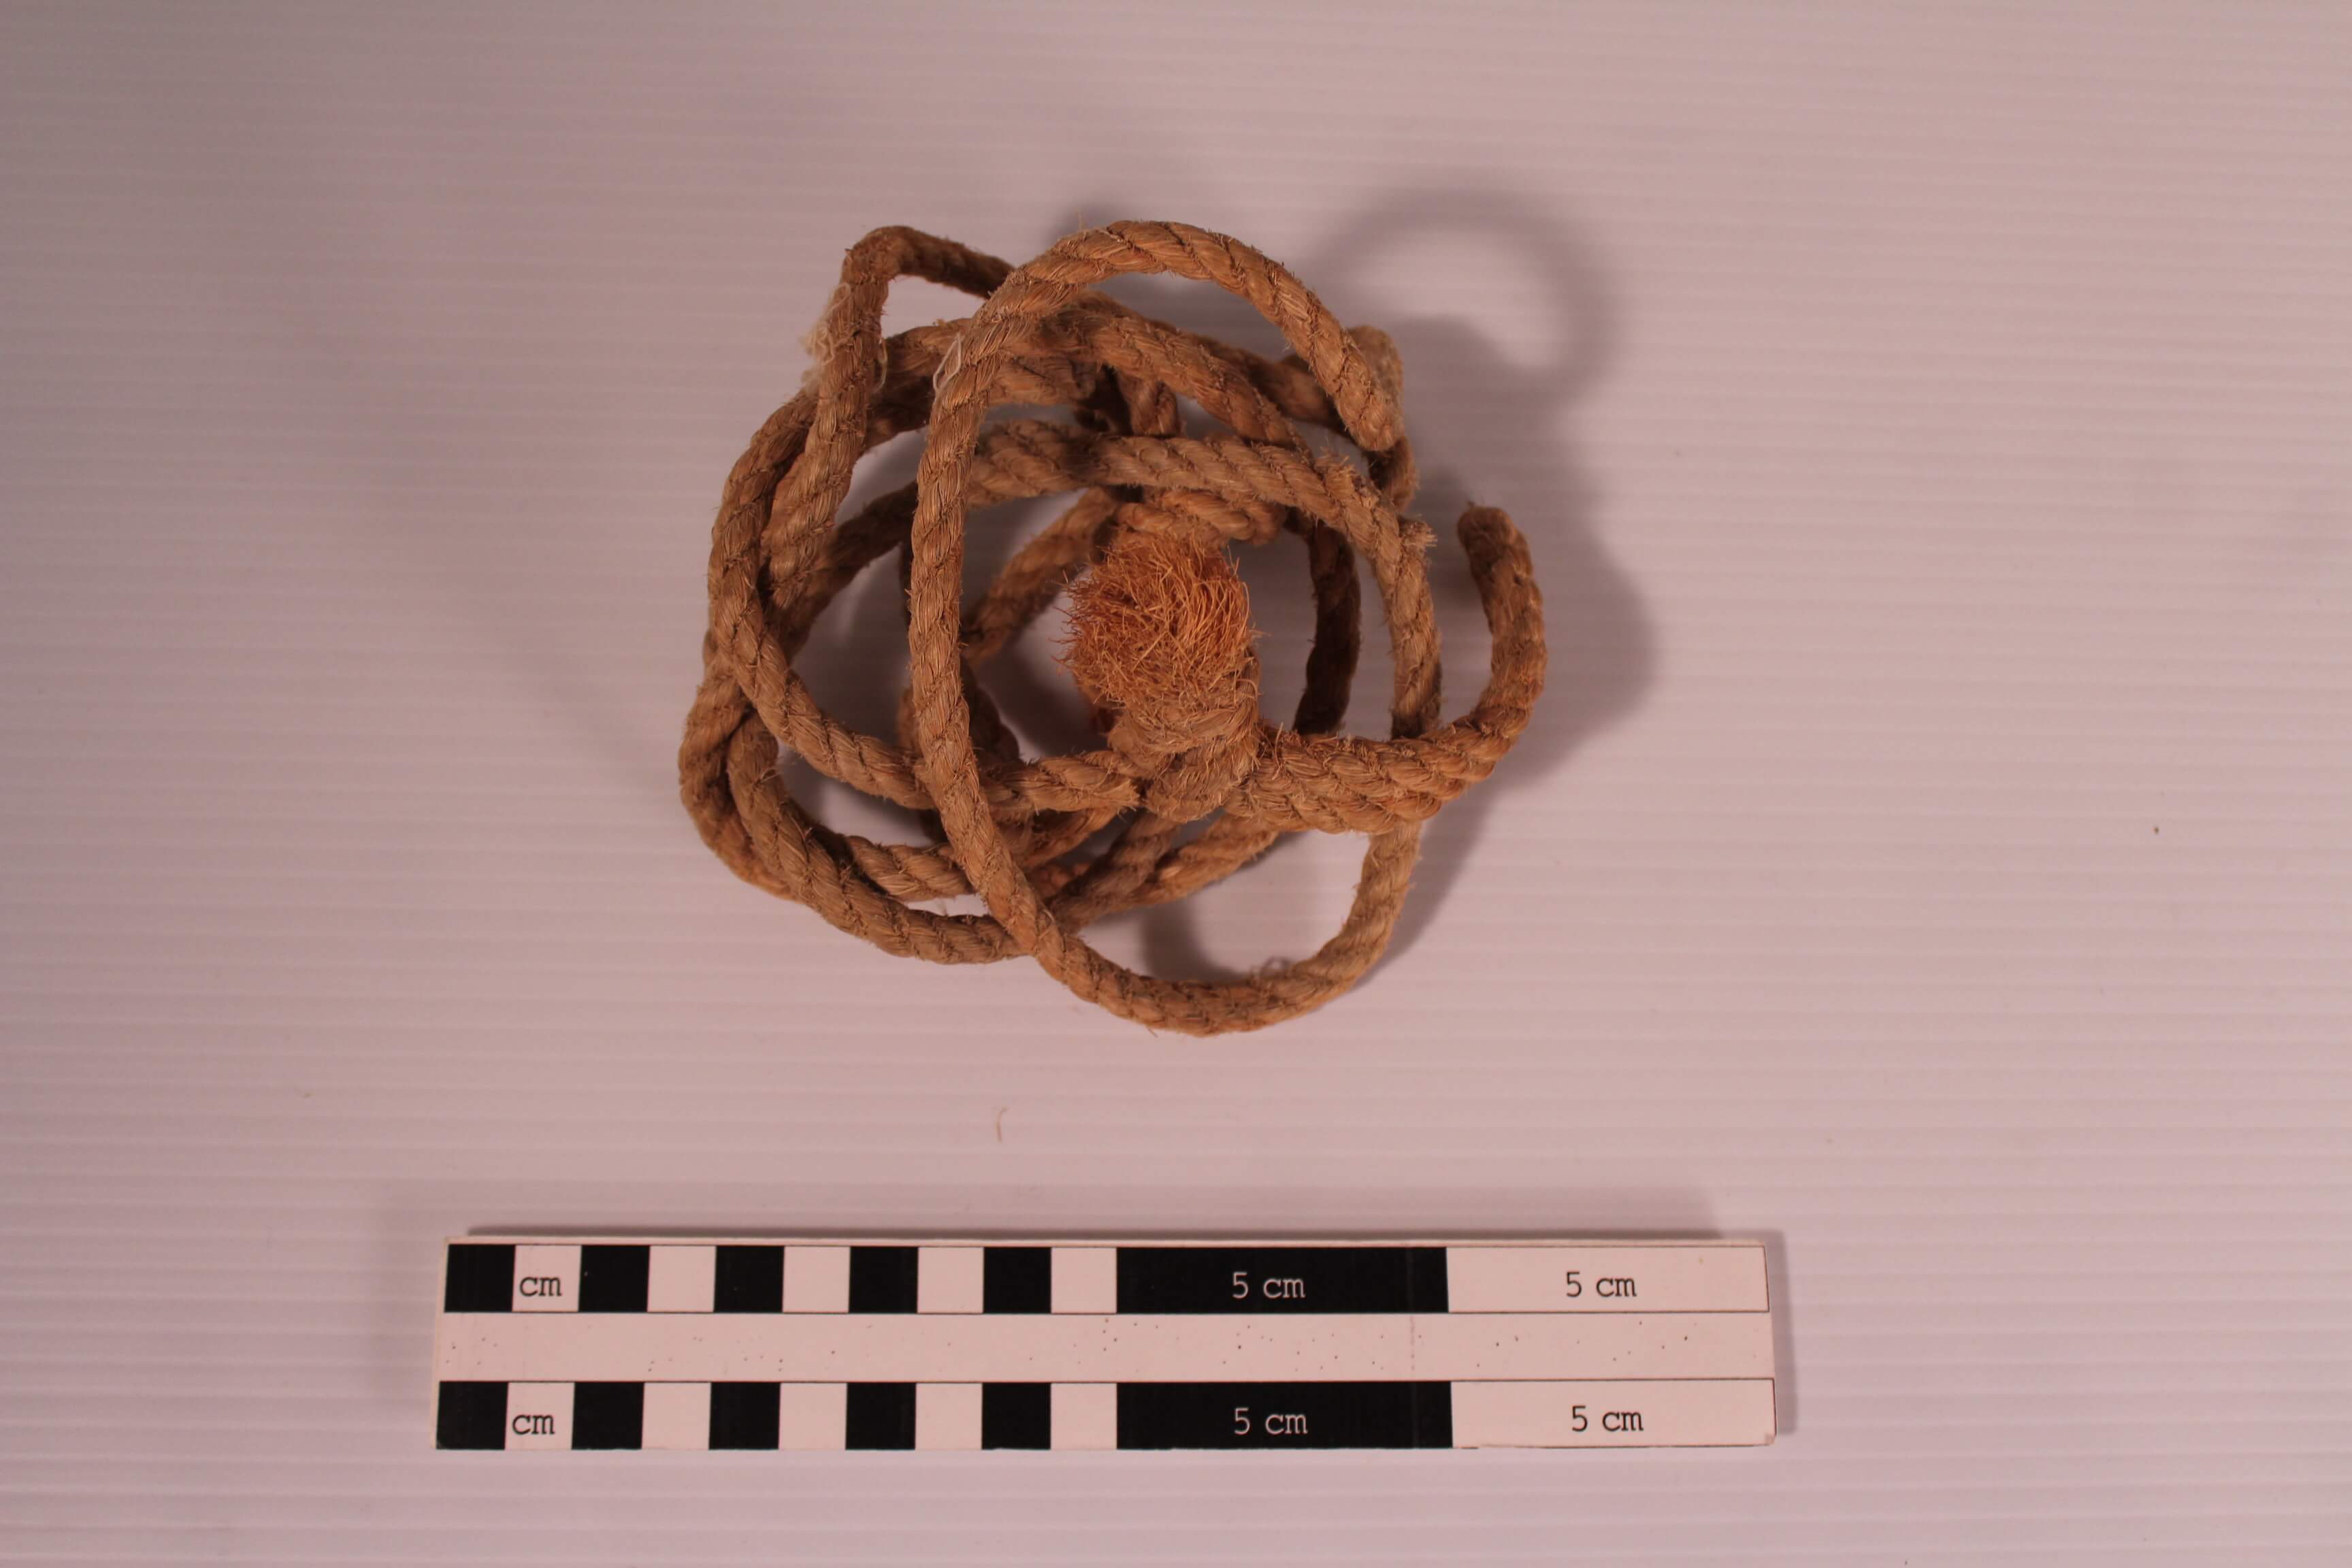 Braided rope found in the cooking kit.